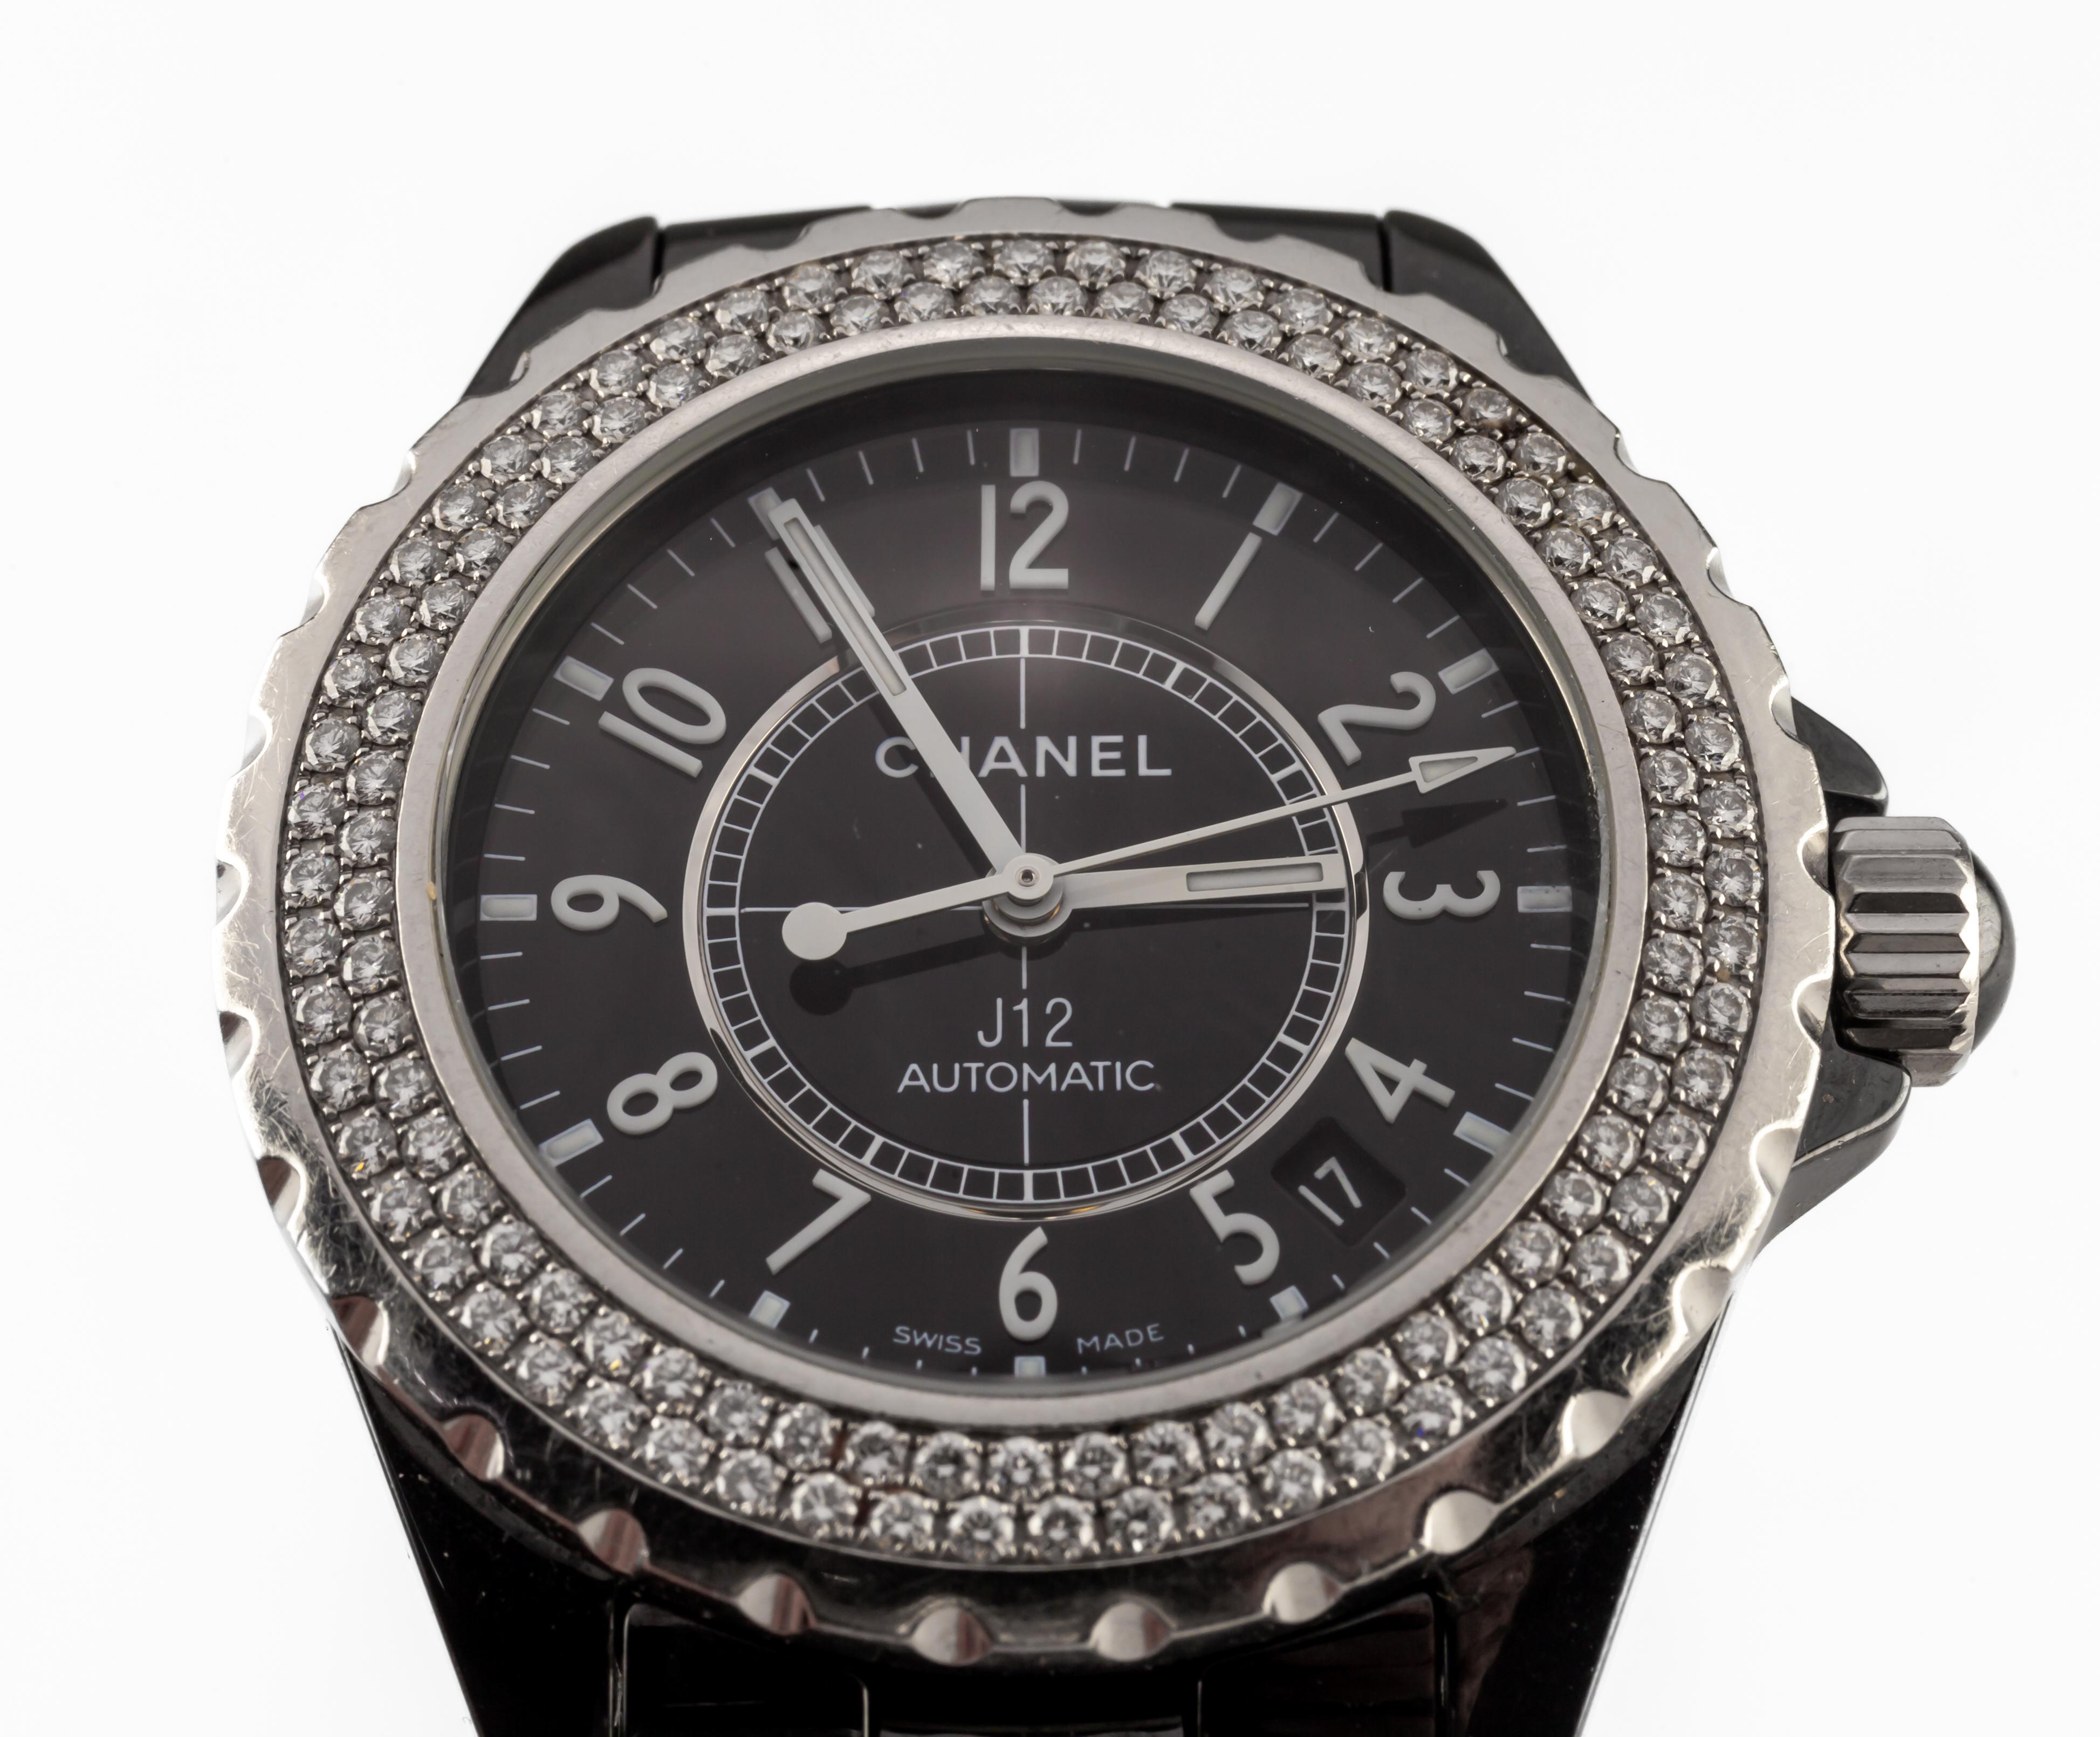 Chanel Ceramic Automatic Watch Diamond Bezel 38 mm H0950 In Good Condition For Sale In Sherman Oaks, CA